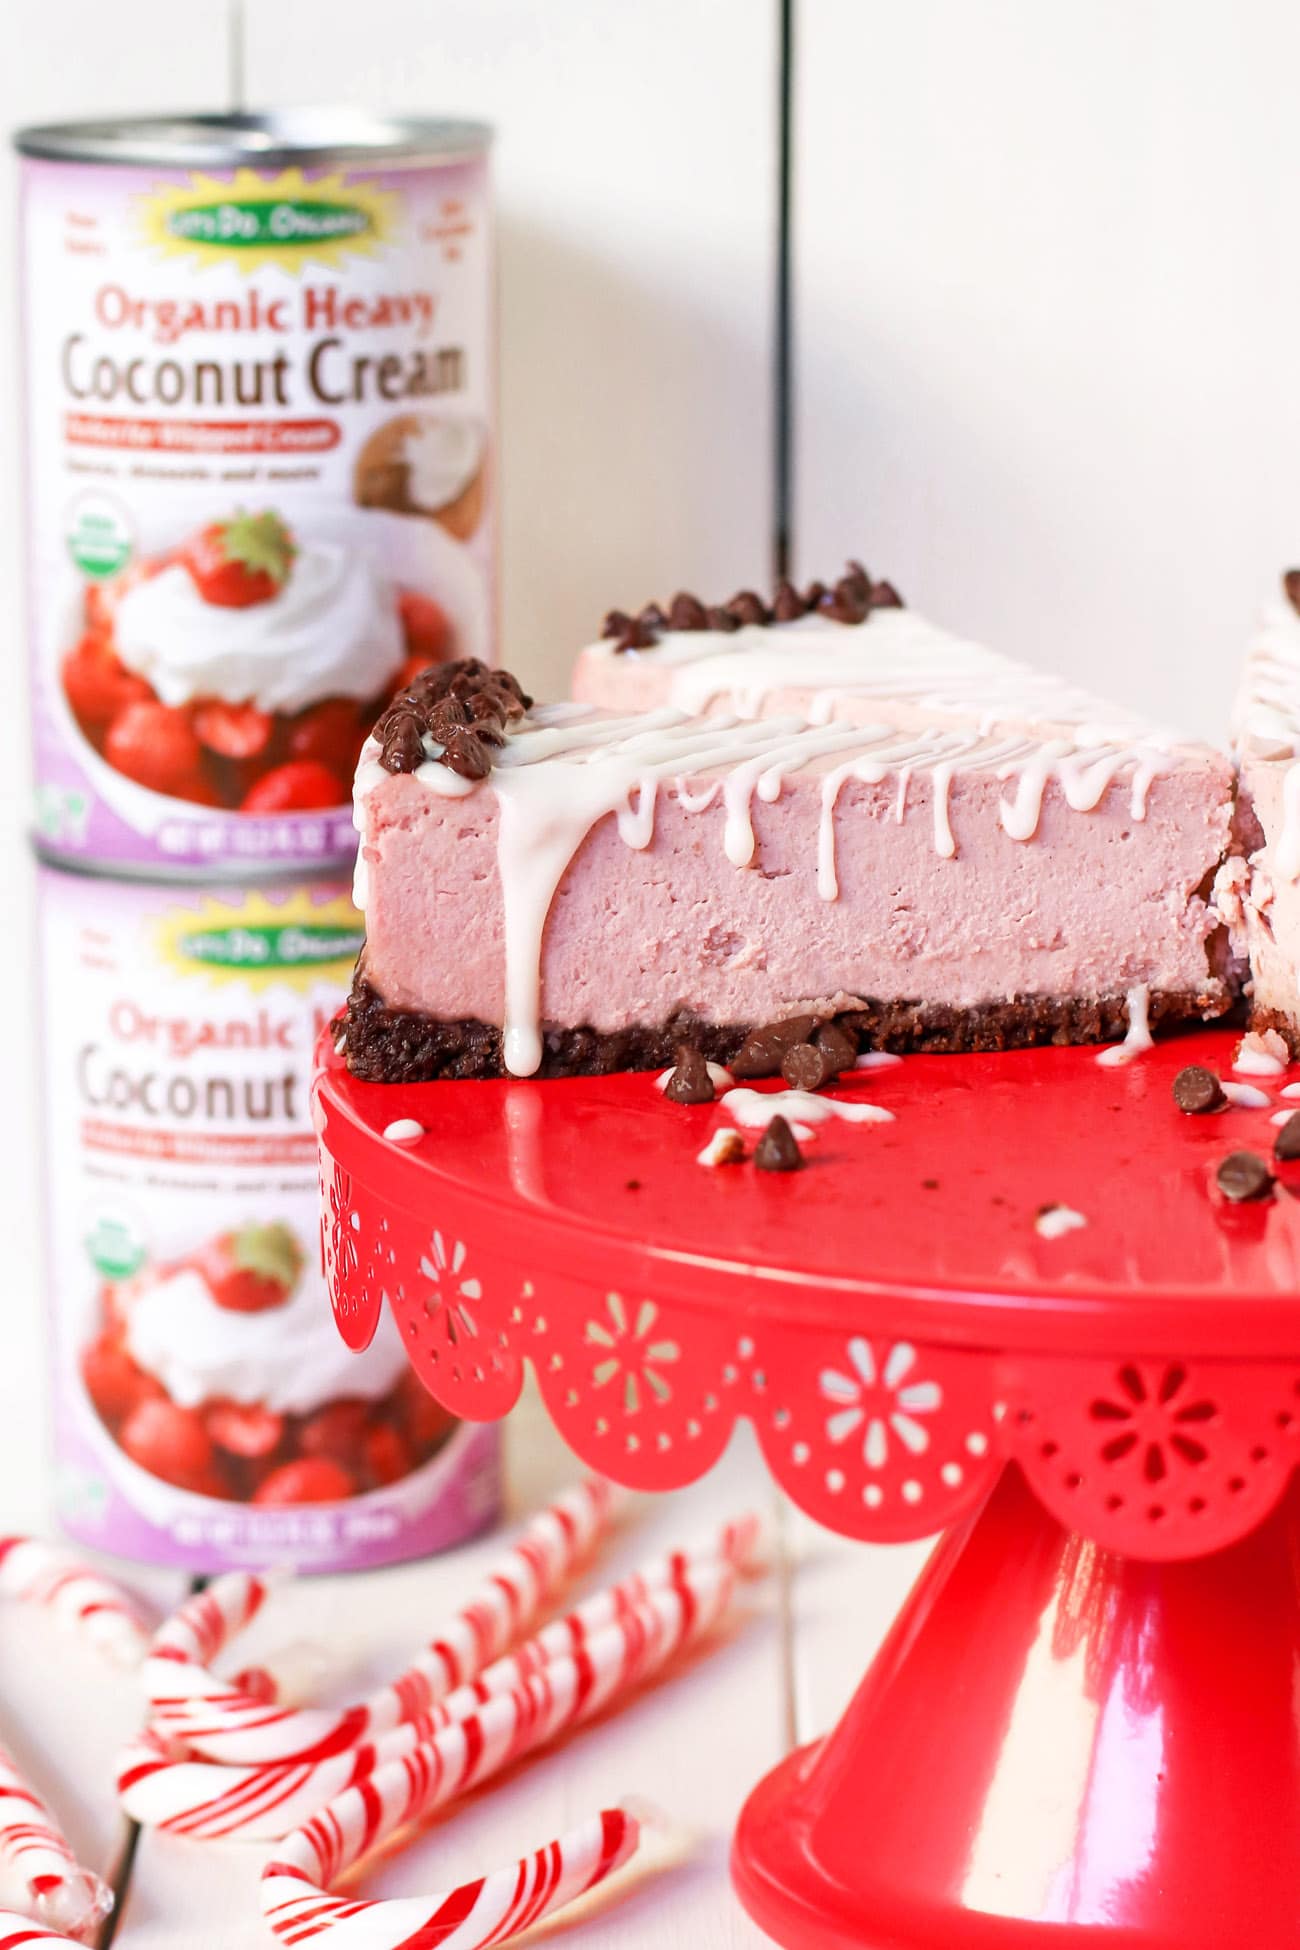 This deliciously rich and creamy no-bake Raw Vegan Peppermint Cheesecake is creamy without the cream cheese, fluffy without the eggs, and secretly sugar free and gluten free too!  No baking required, no water bath needed. Perfect for the holidays, birthdays, parties, or no reason at all!